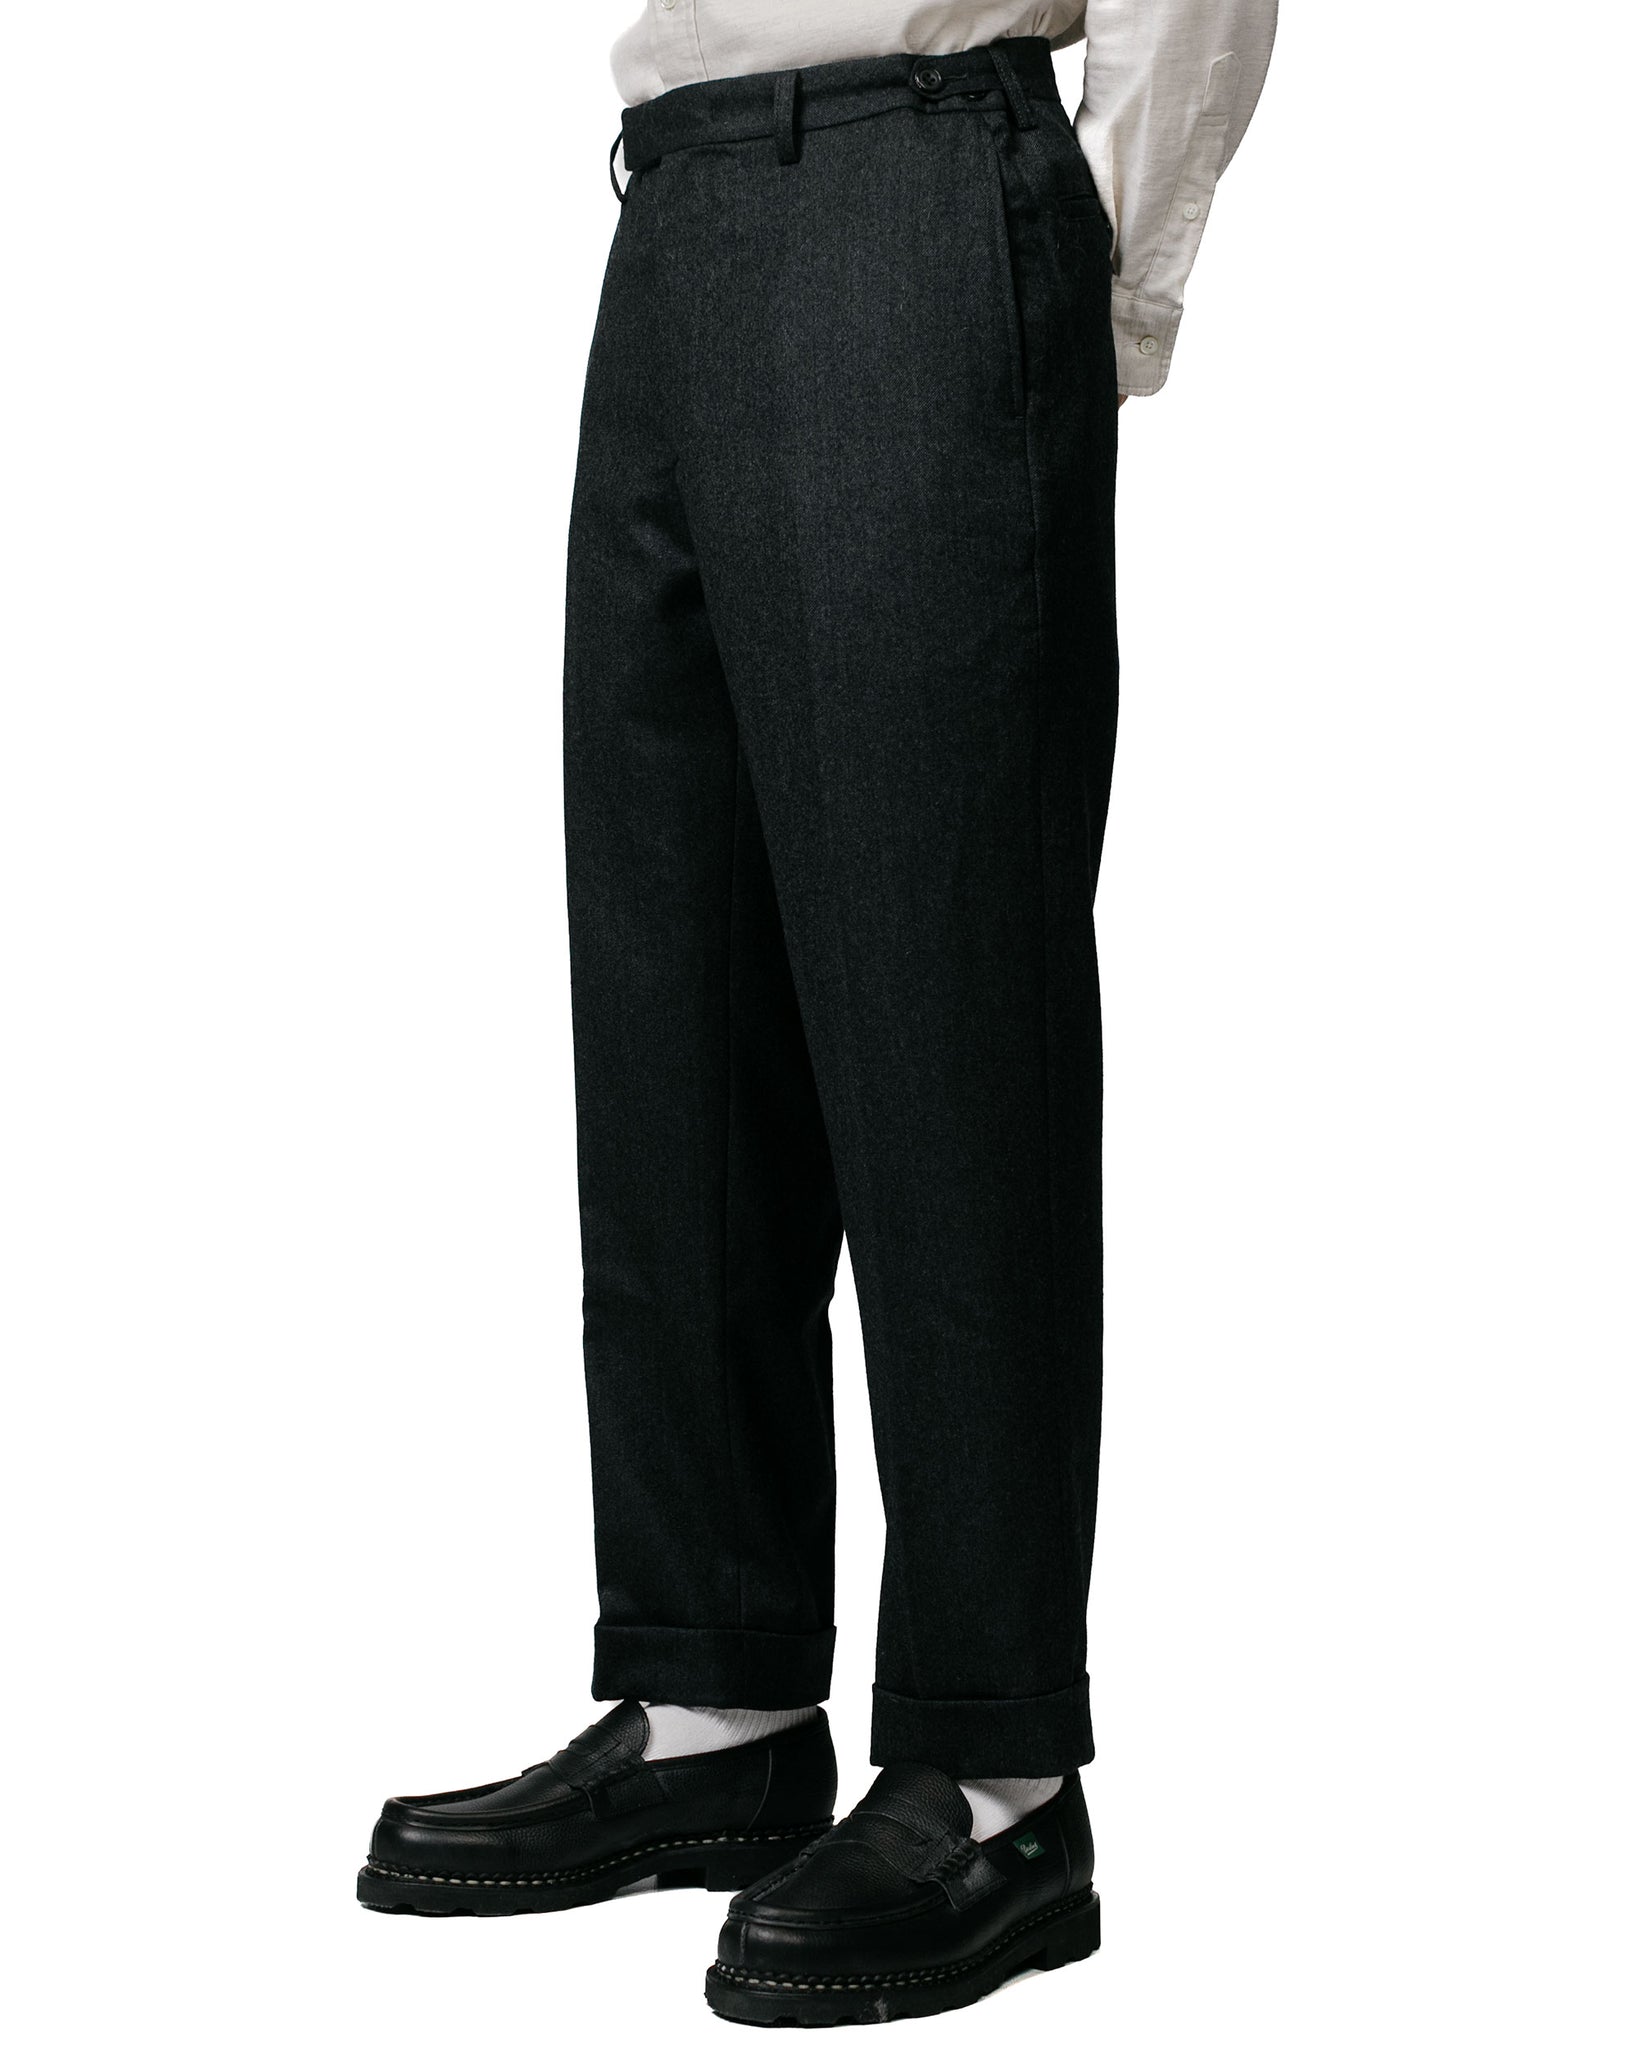 Beams Plus Ivy Trousers Ankle-Cut Flannel Charcoal Grey model front